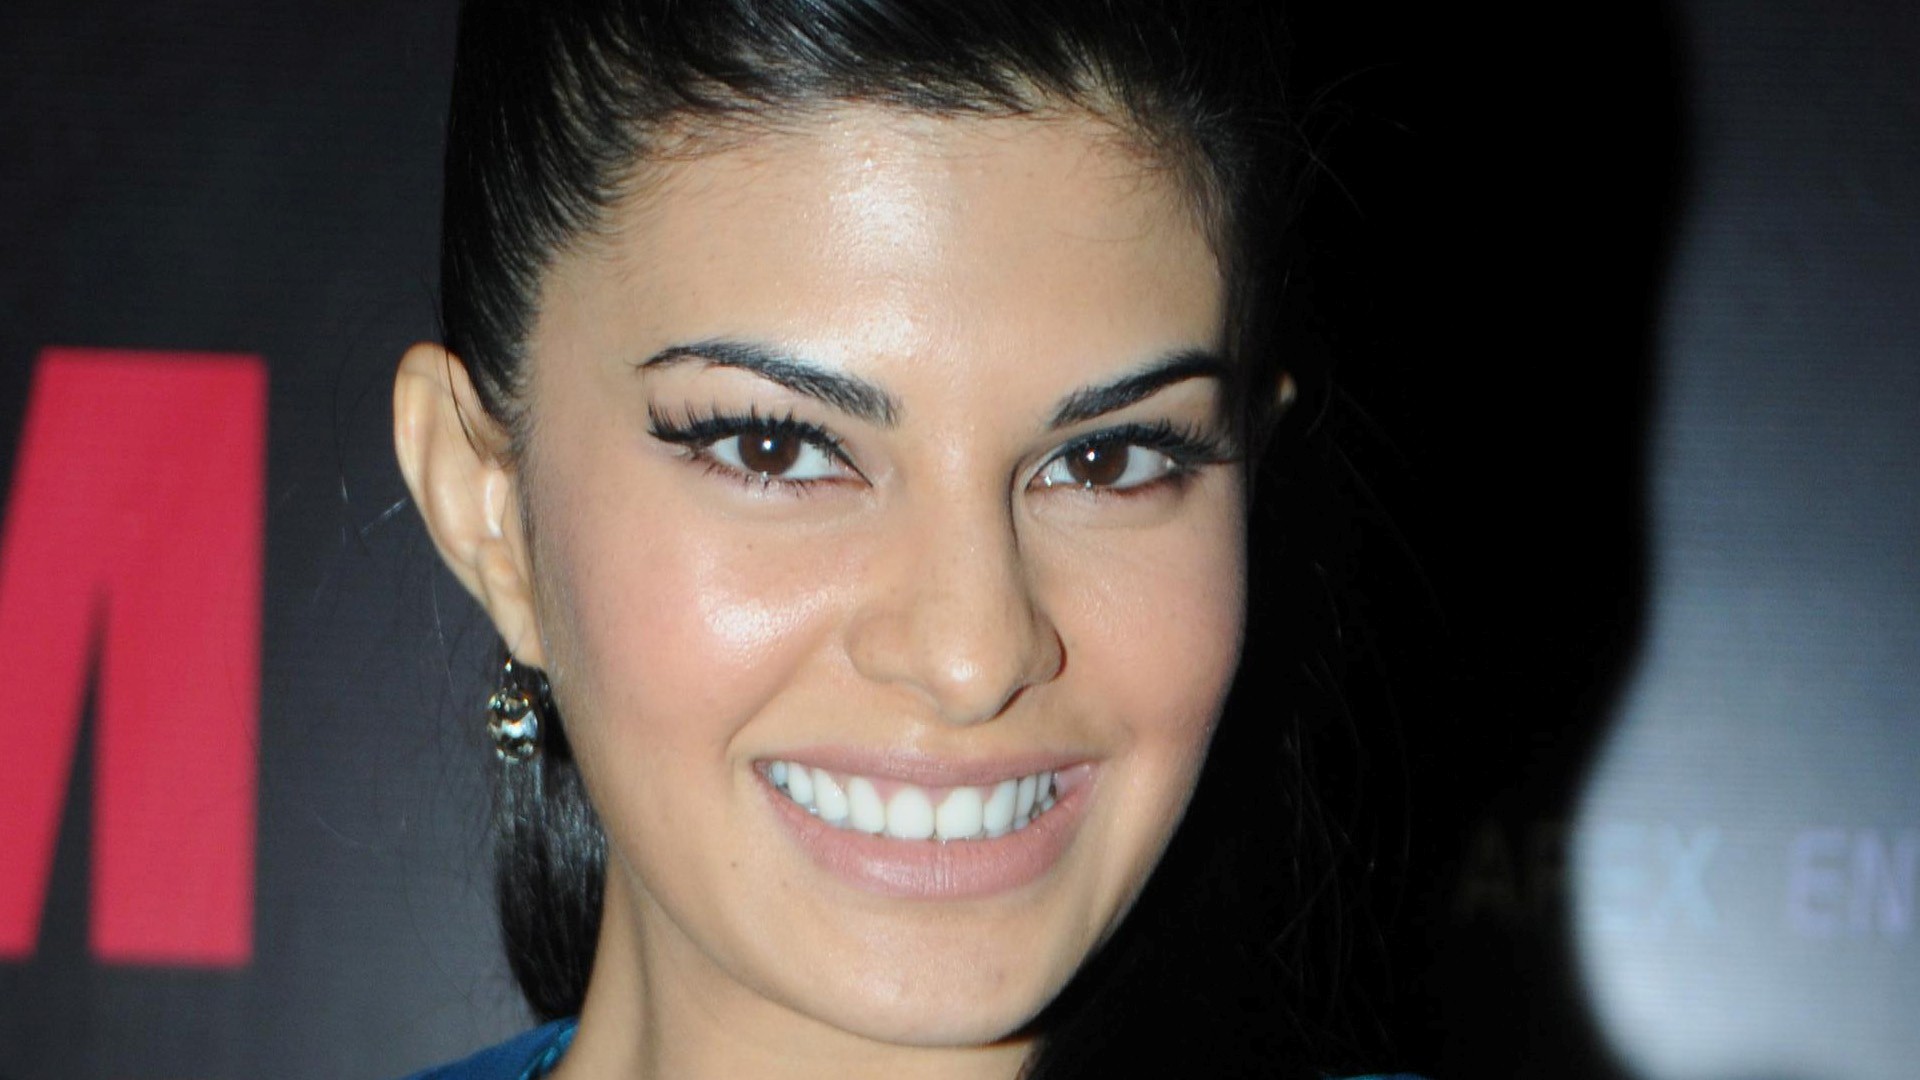 Beautiful Smile Face Of Actress Jacqueline Fernandez - Jacqueline Fernández Hot Face - HD Wallpaper 